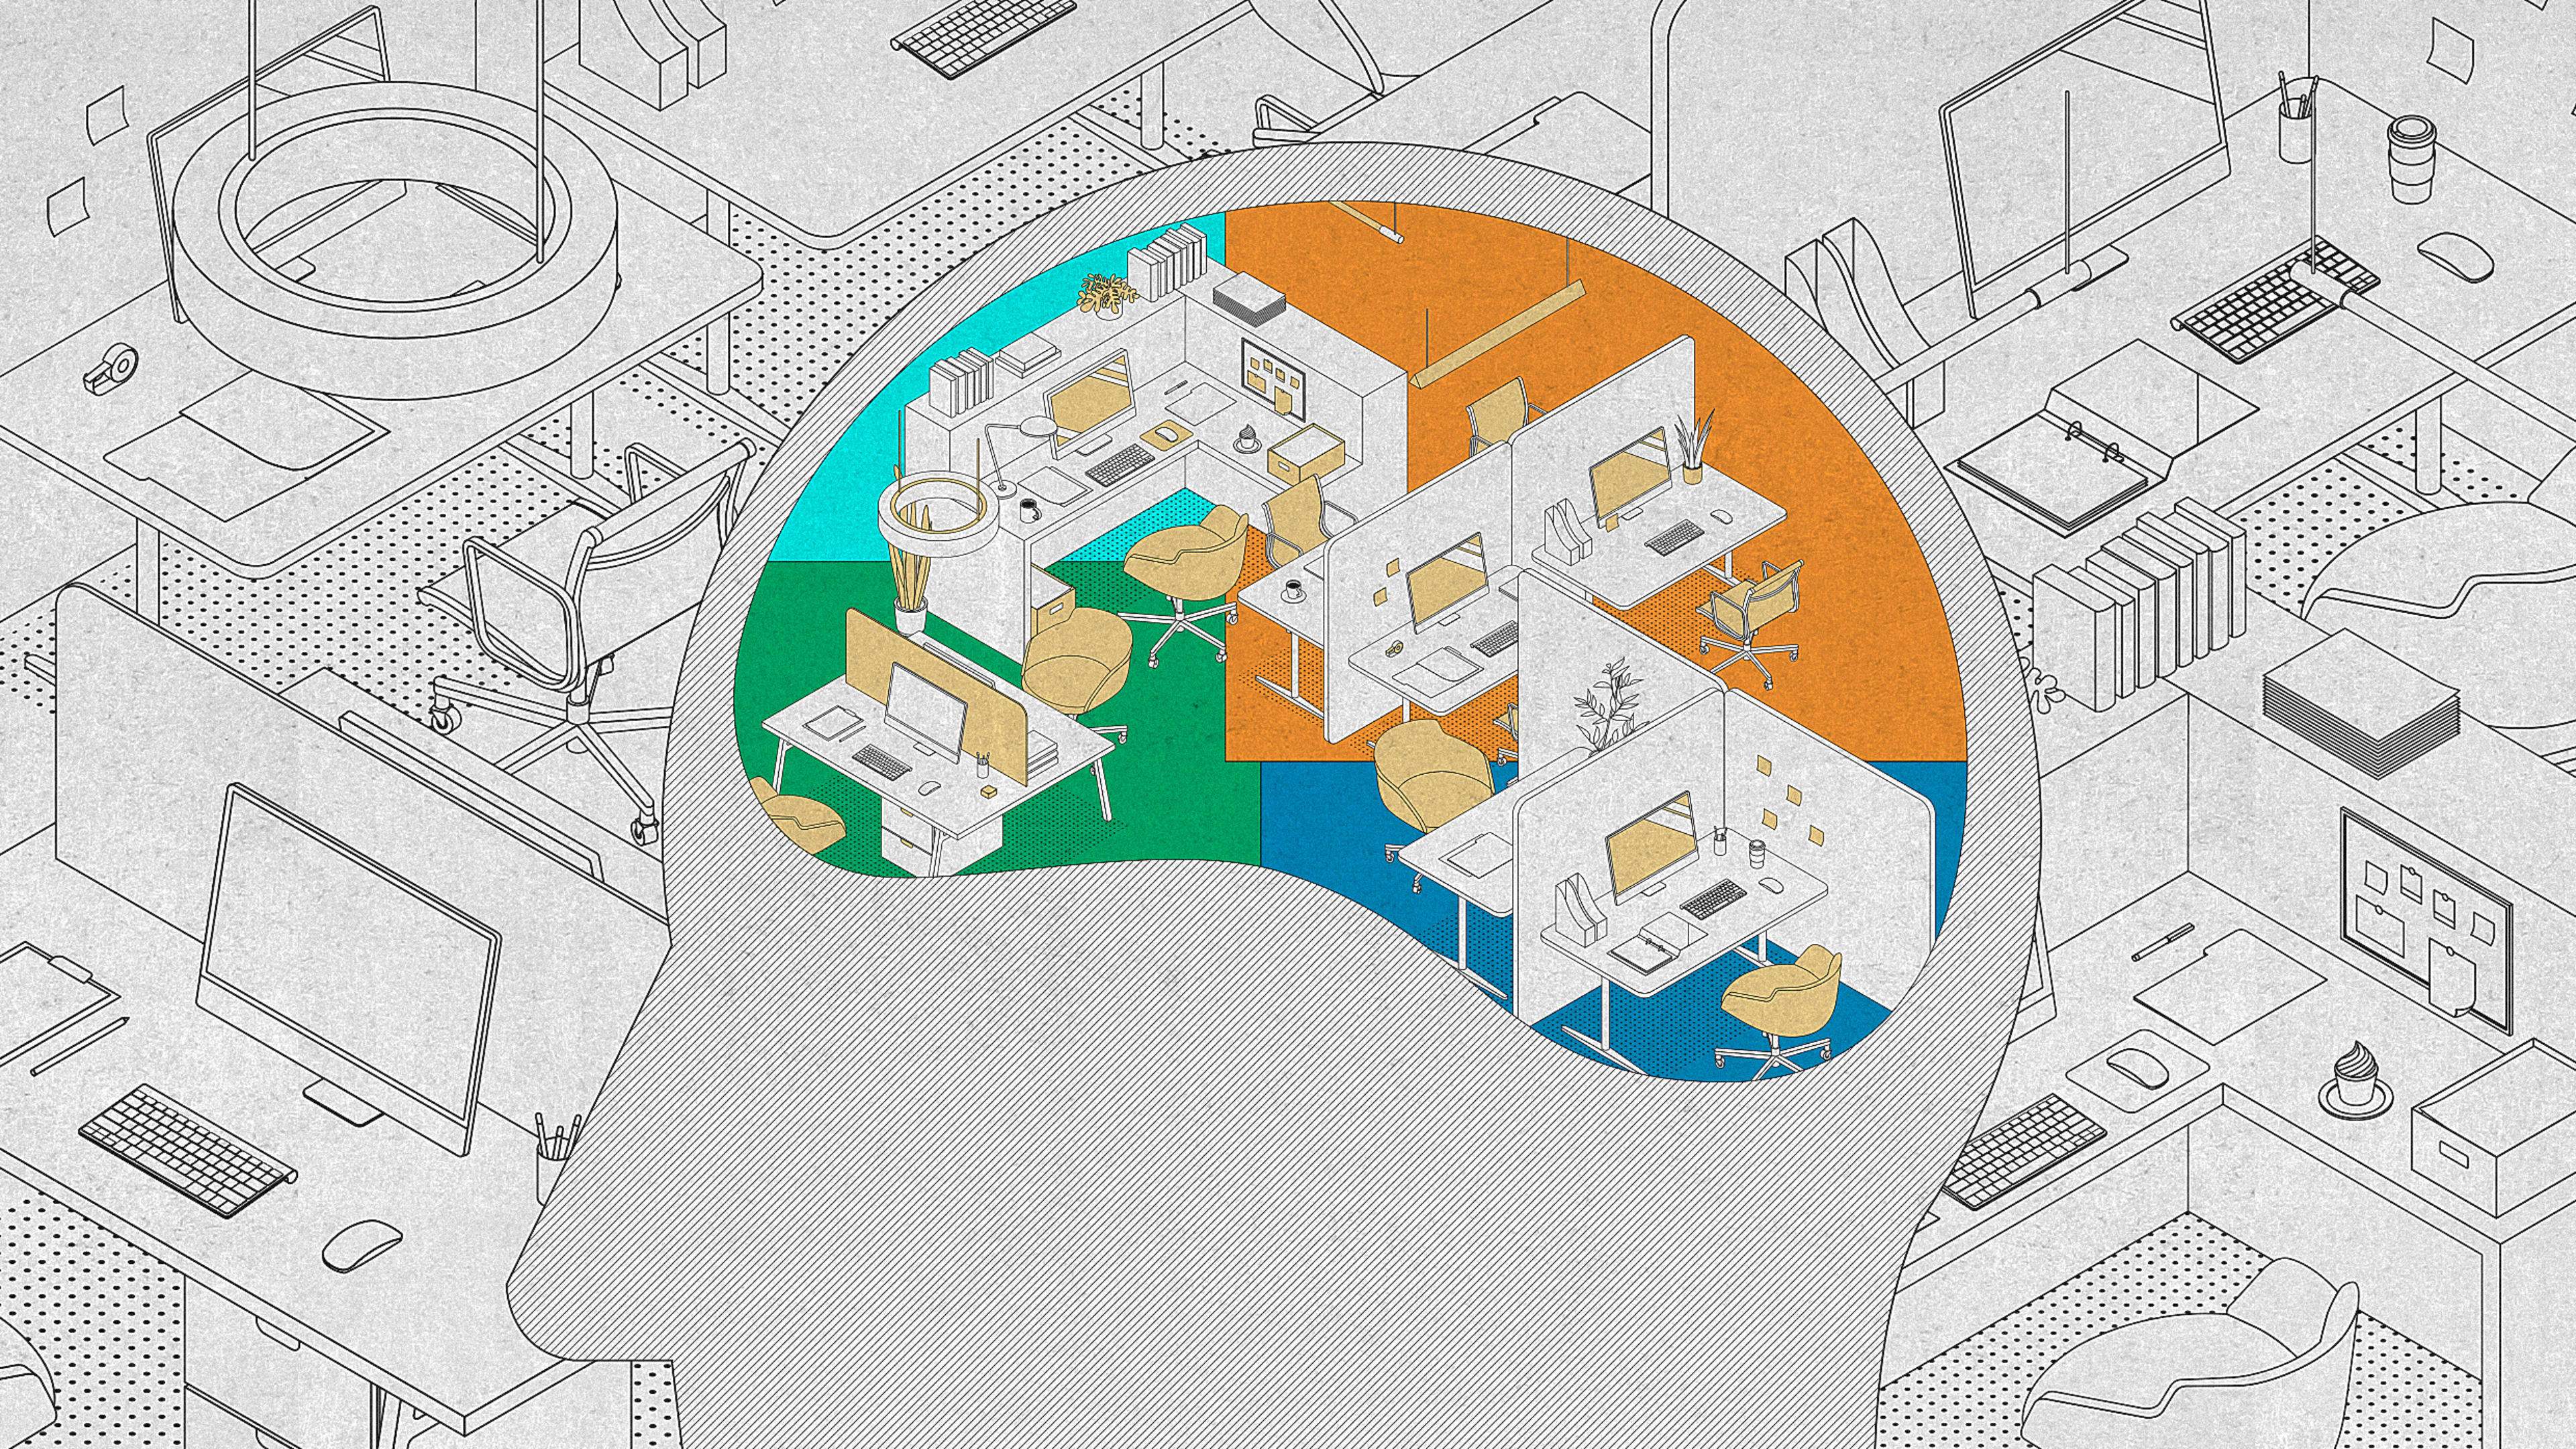 Five detailed ways to design an office for neurodiversity